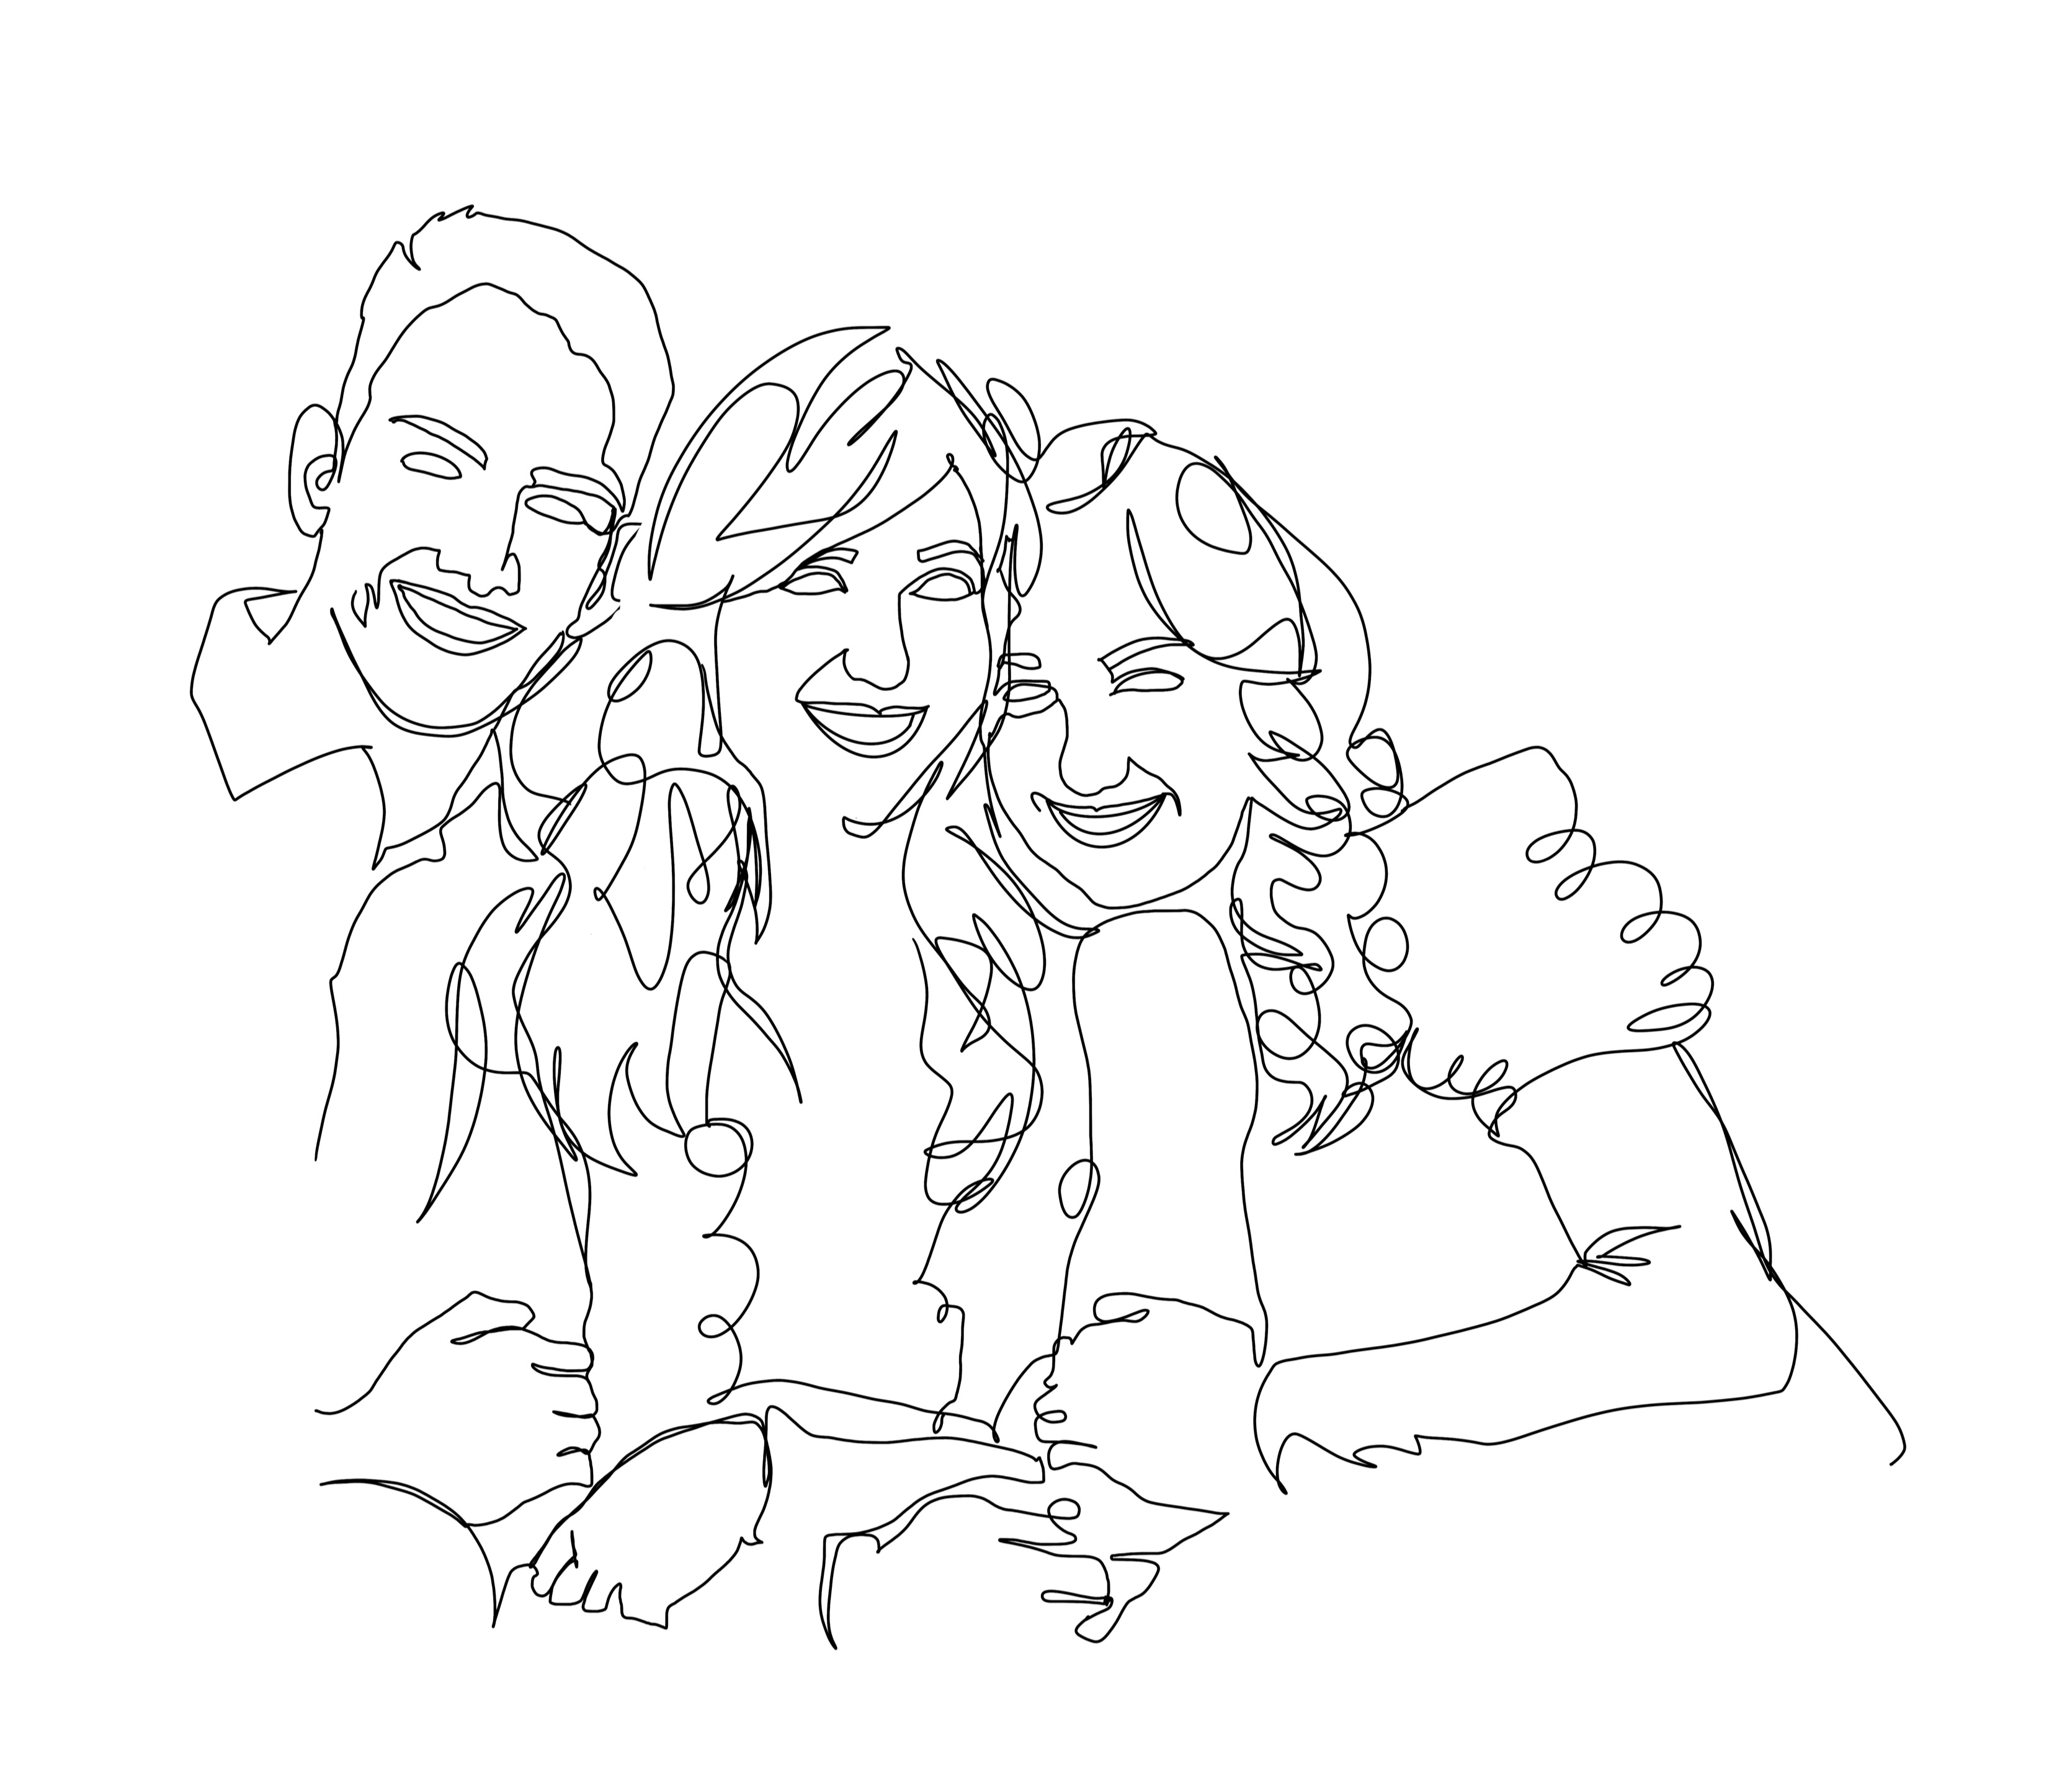 Single line drawing of family by Allie Traxler